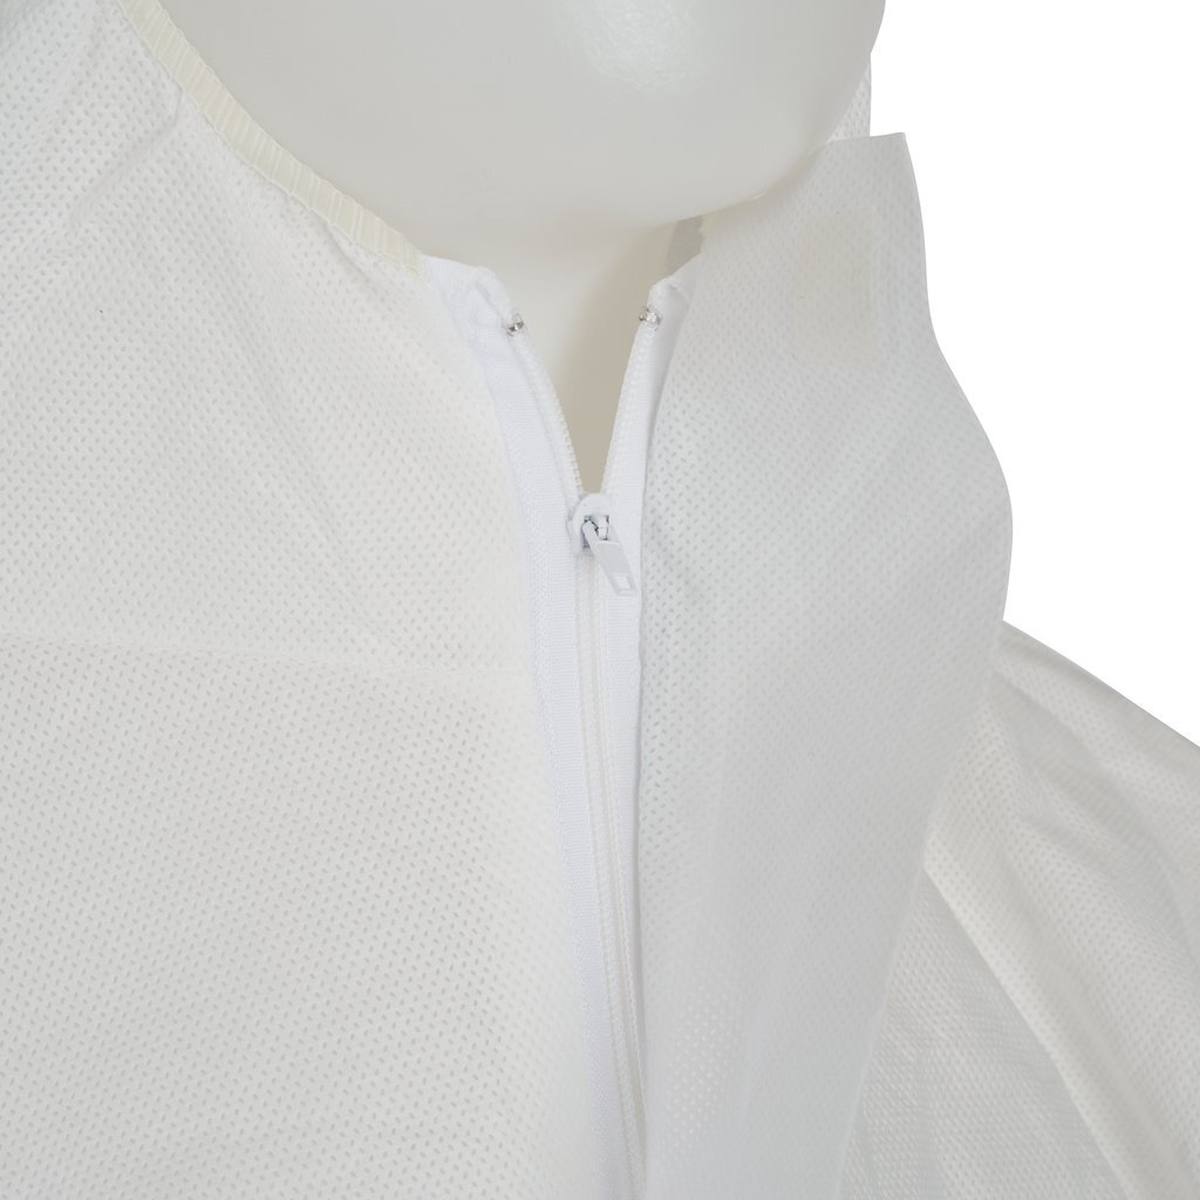 3M 4515W Protective coverall, white, TYPE 5/6, size S, material SMMS low-lint, elasticated cuffs